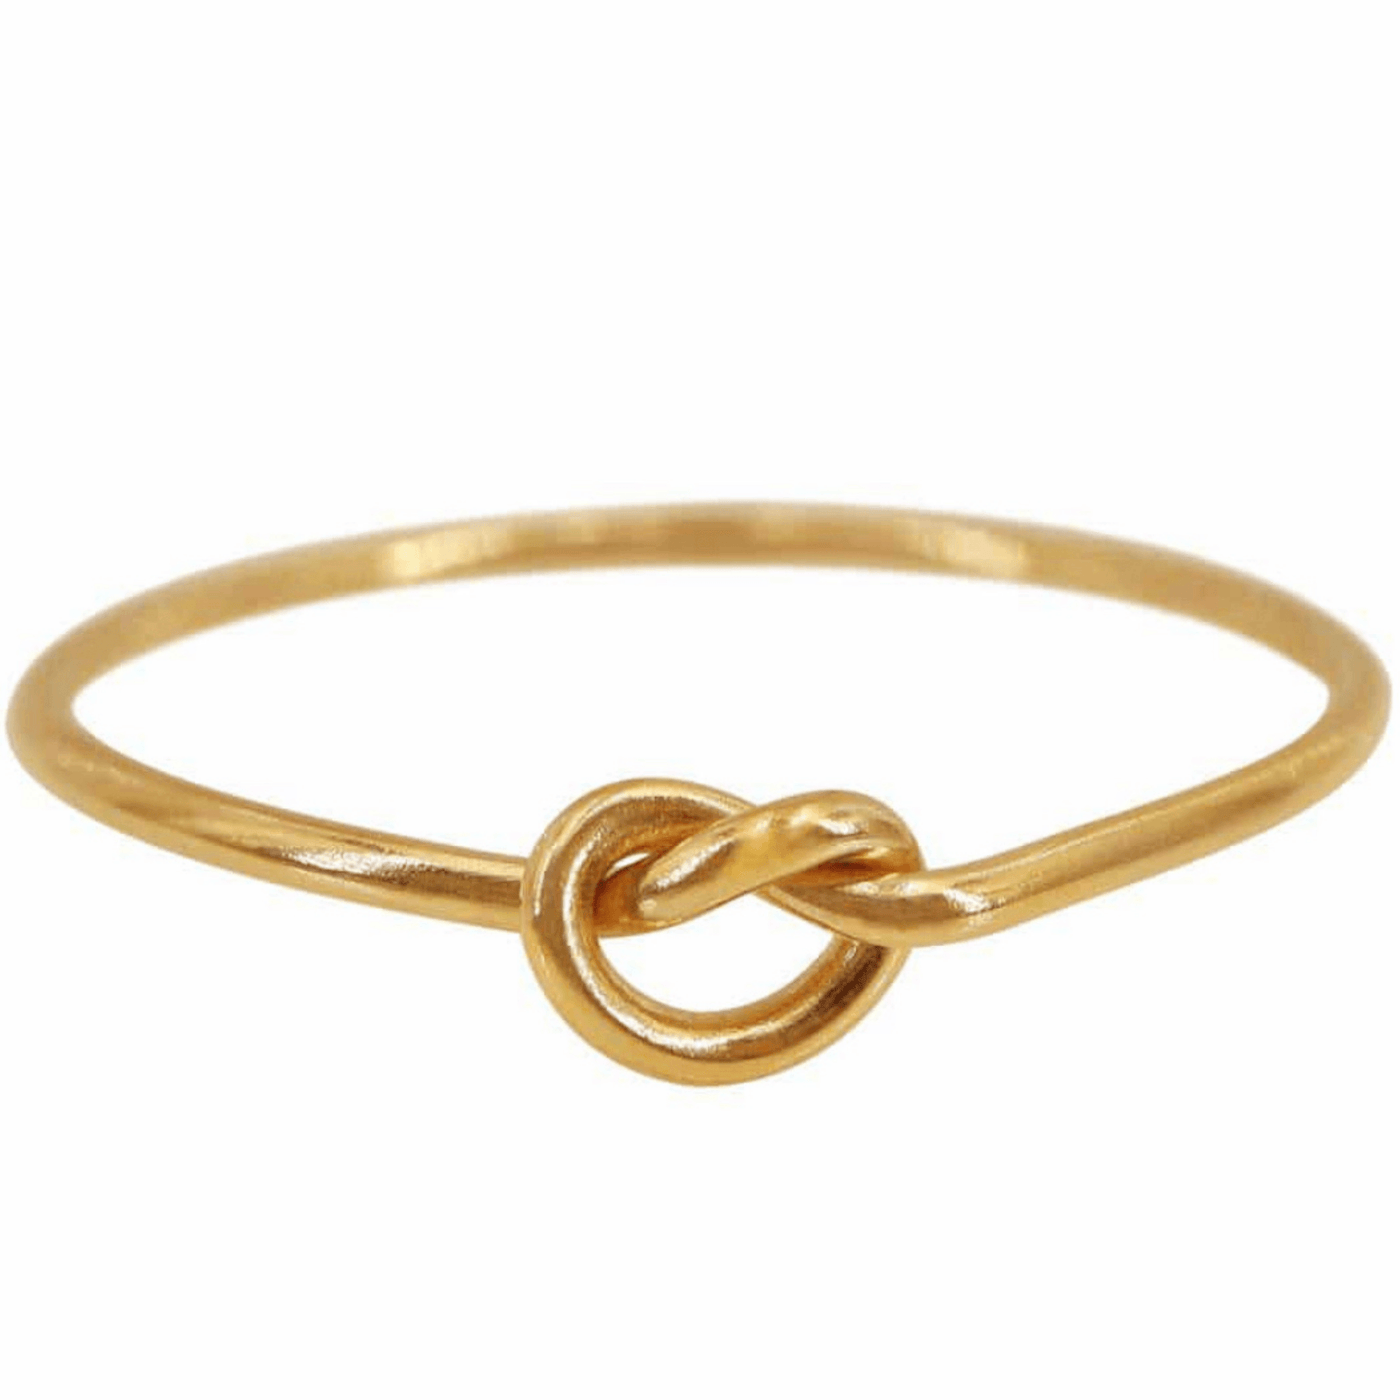 14K Gold filled knot ring on white background. The ring is a 14Kgold filled wire tied into a loop knot as it's centre point.